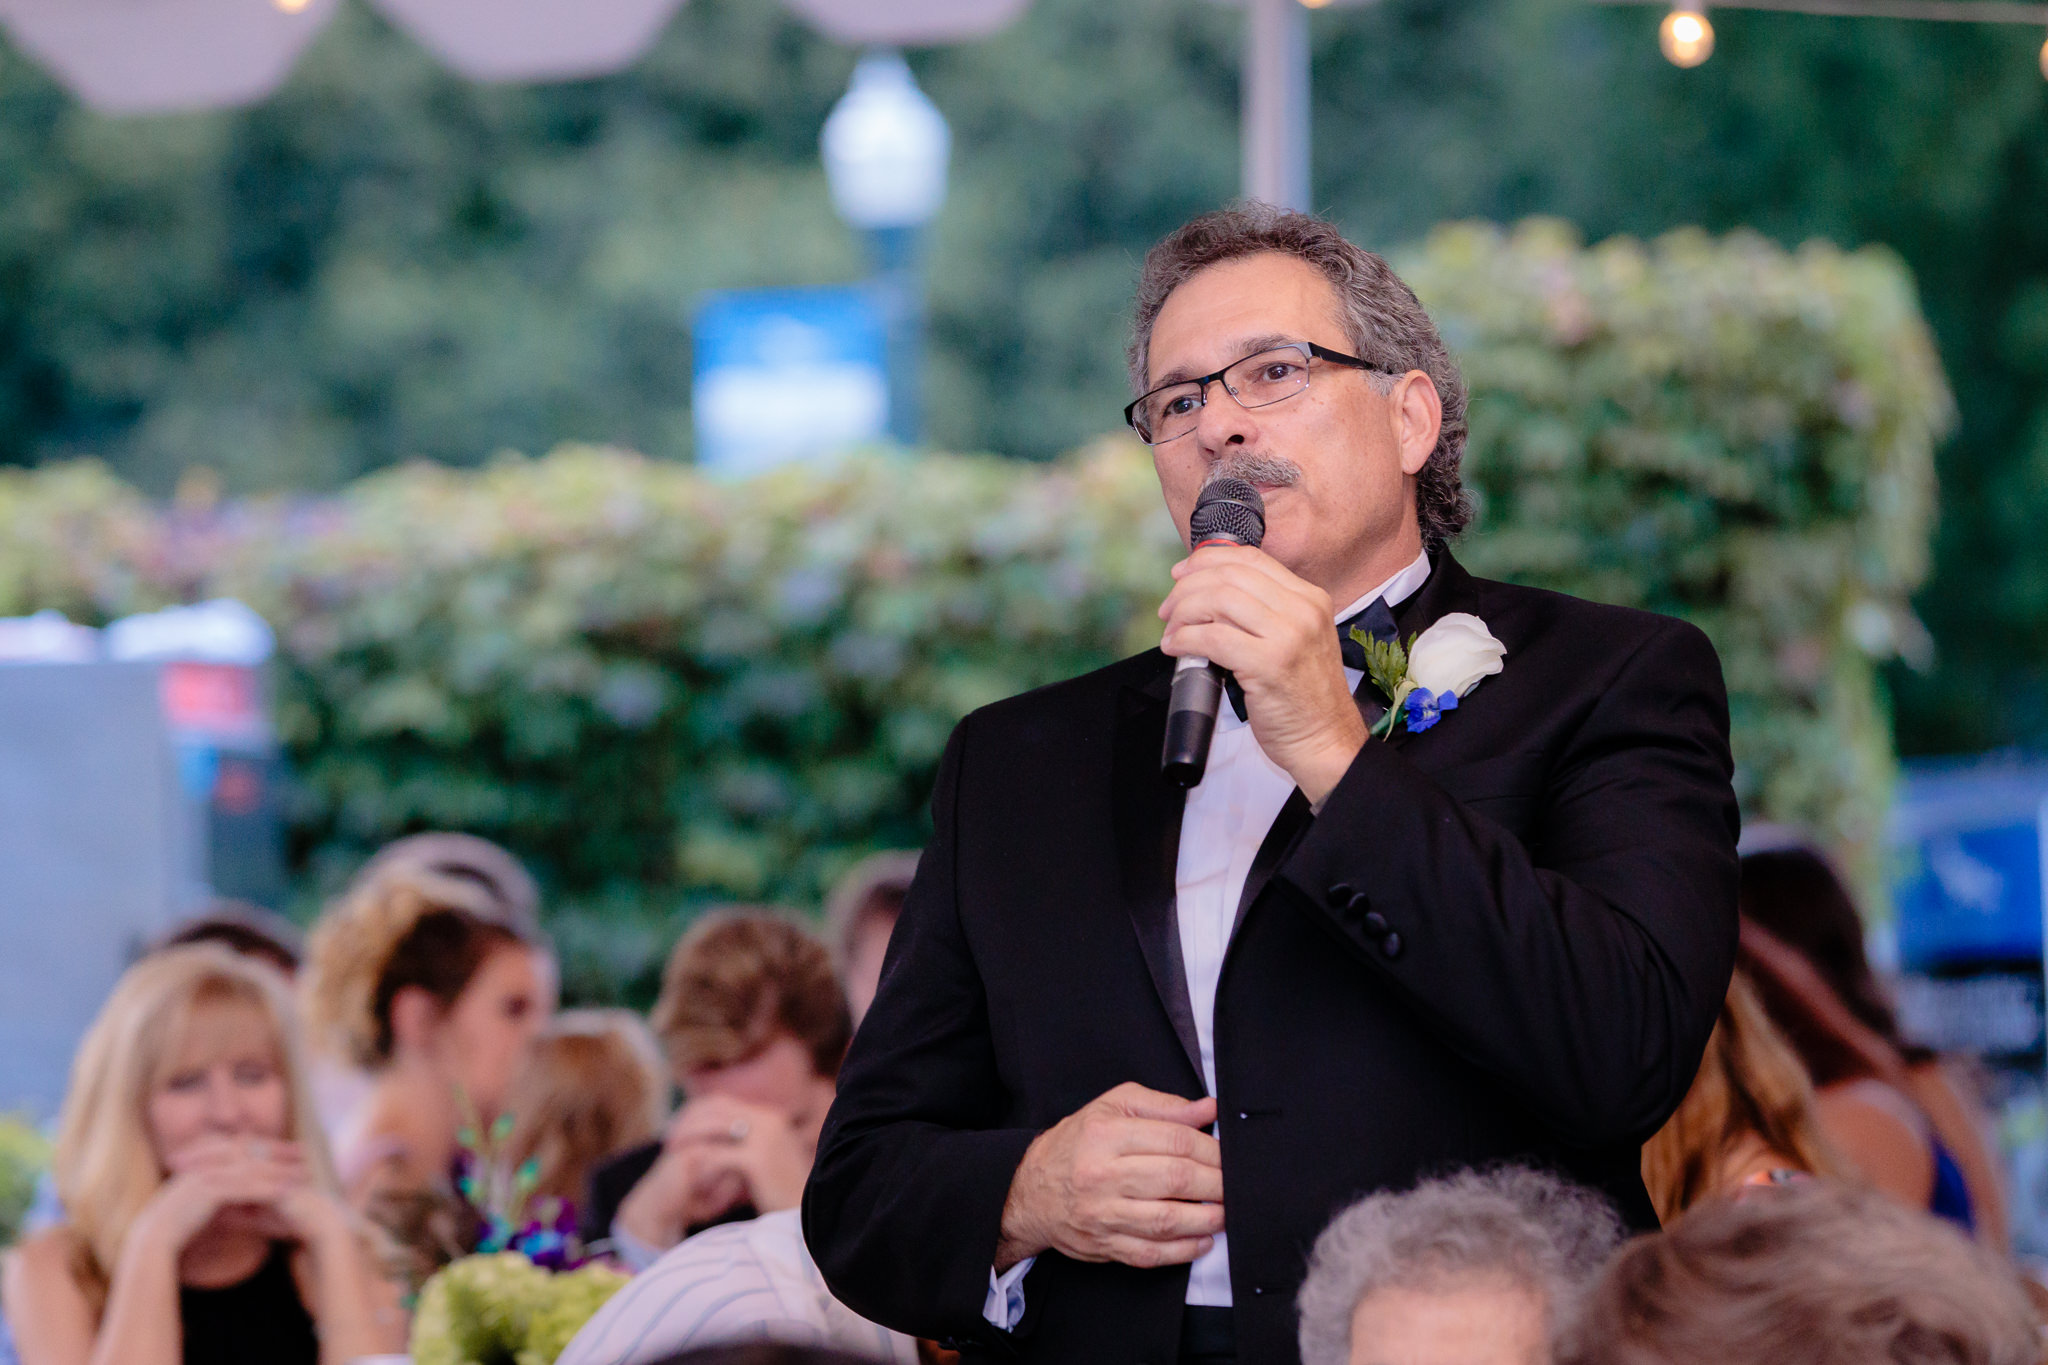 Father of the bride gives a blessing at a National Aviary wedding reception